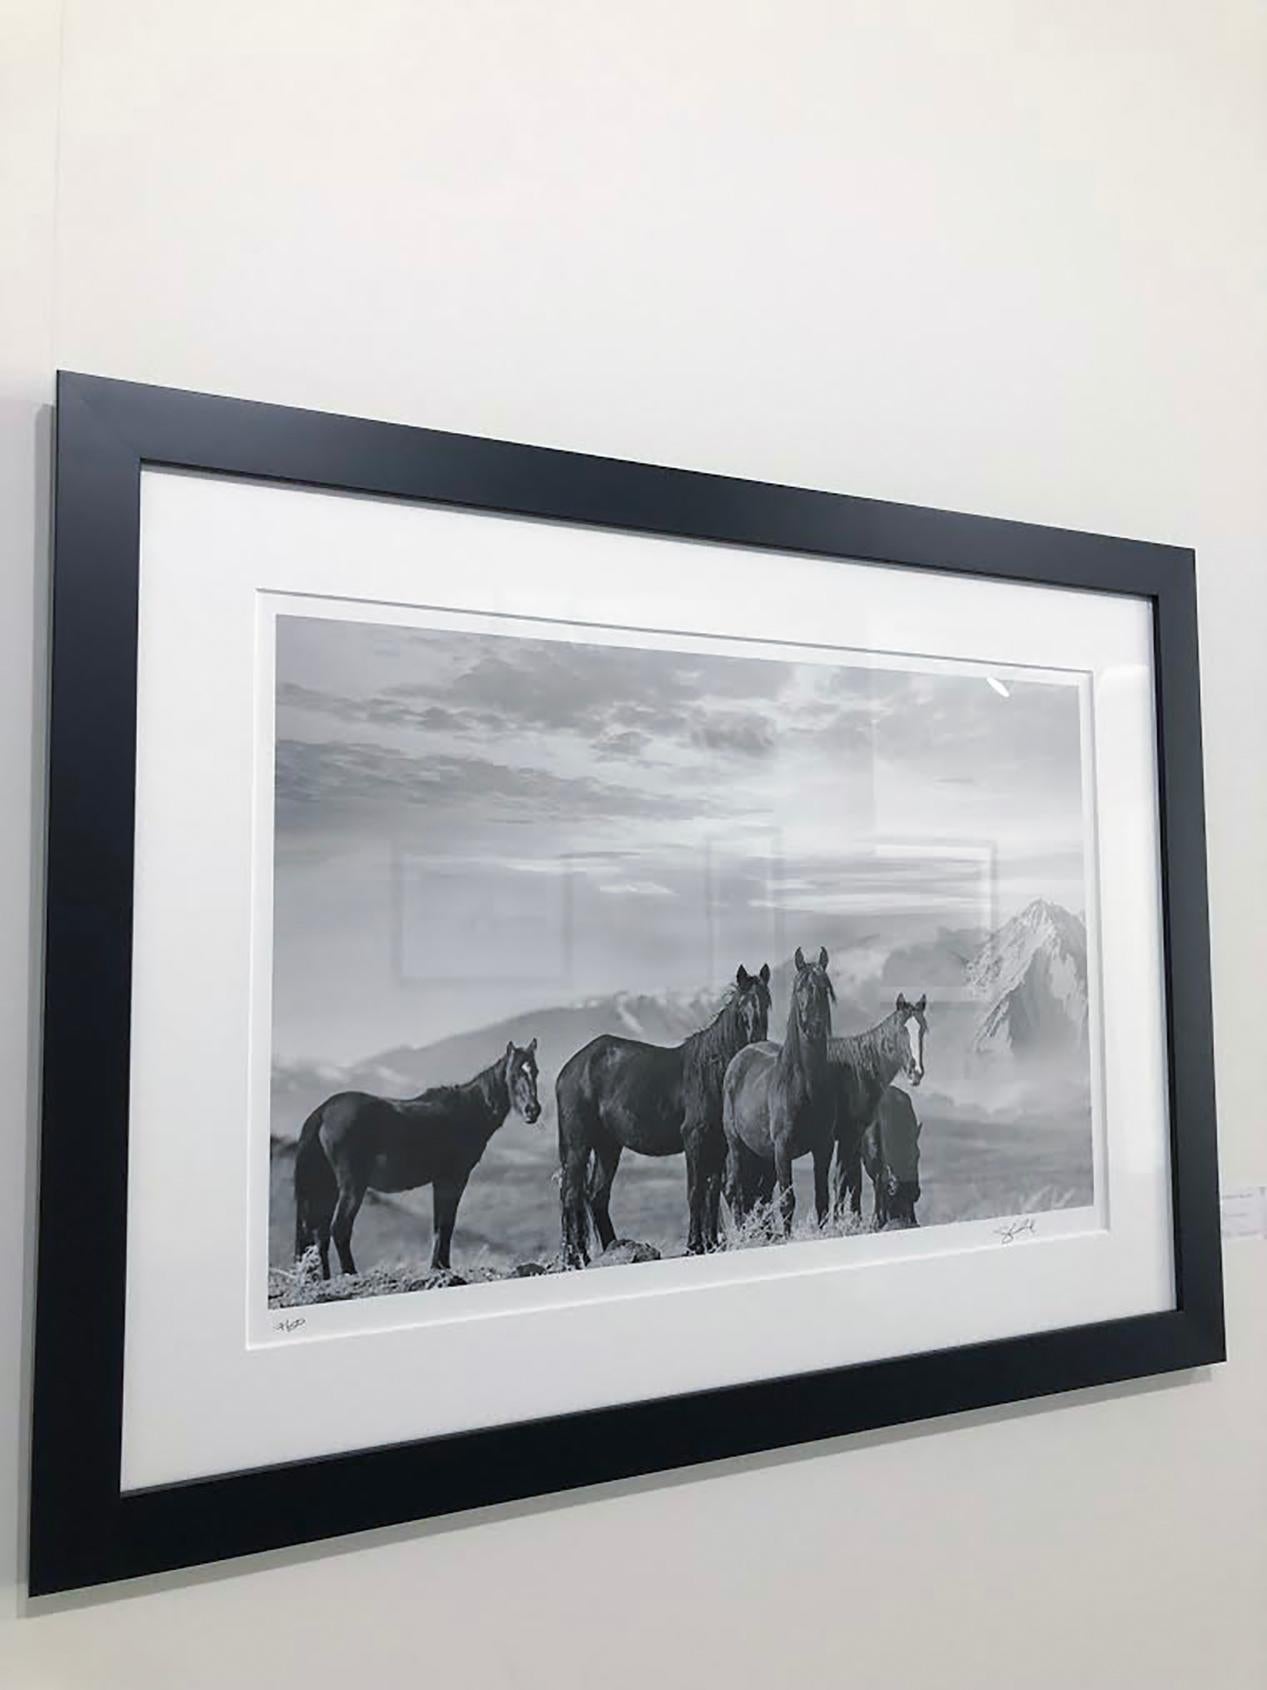 High Sierra Mustangs 36x48 Black and White Photography Wild Horses, Mustangs 2